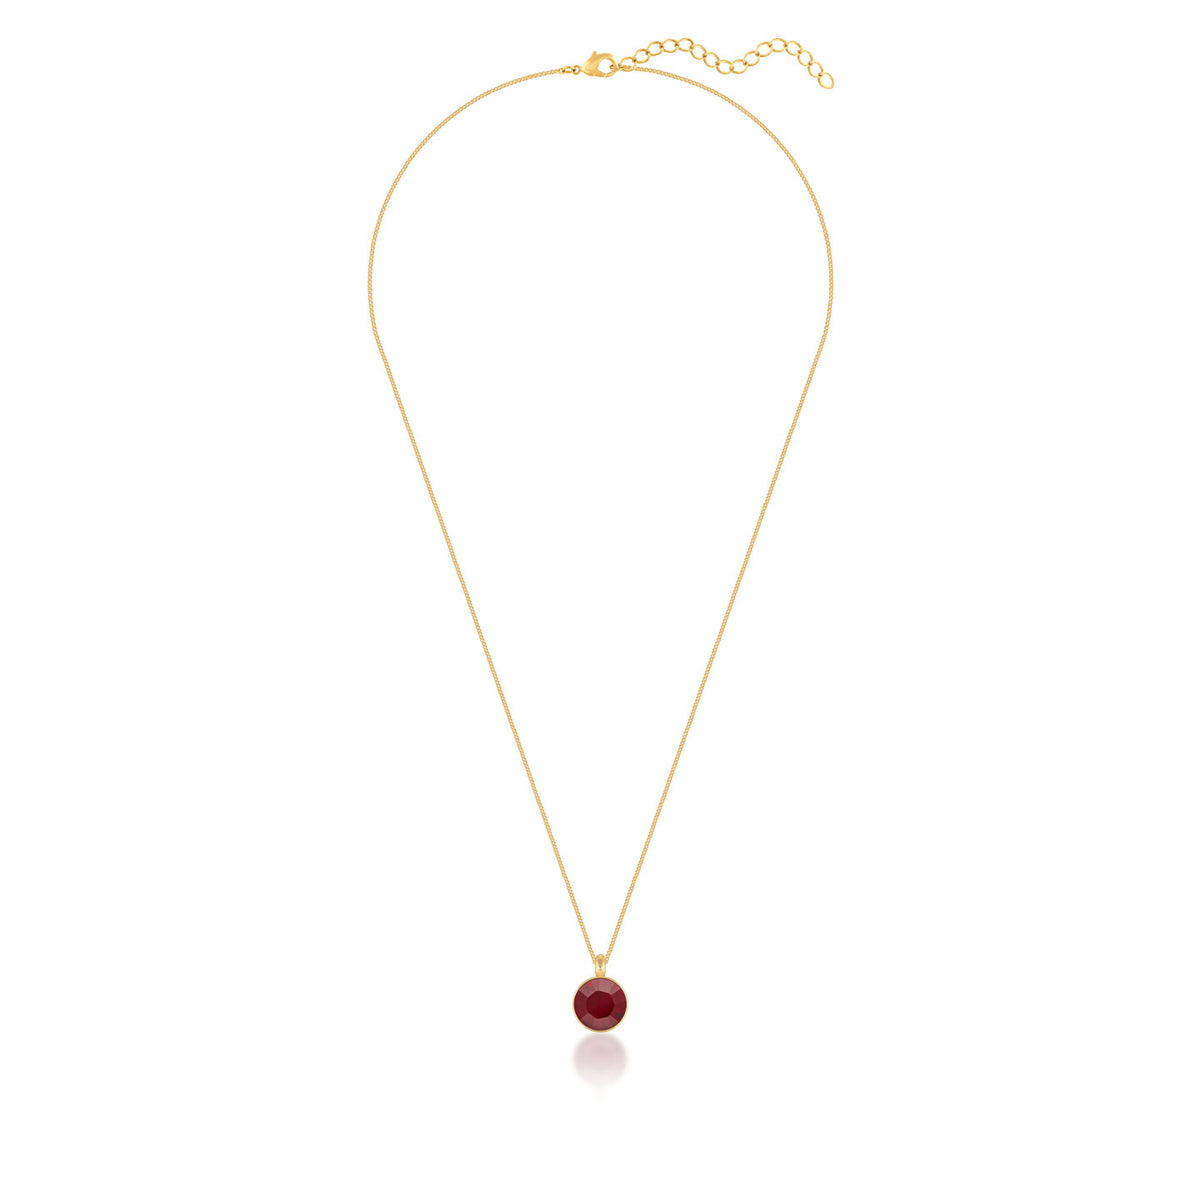 Bella Pendant Necklace with Red Siam Round Crystals from Swarovski Gold Plated - Ed Heart